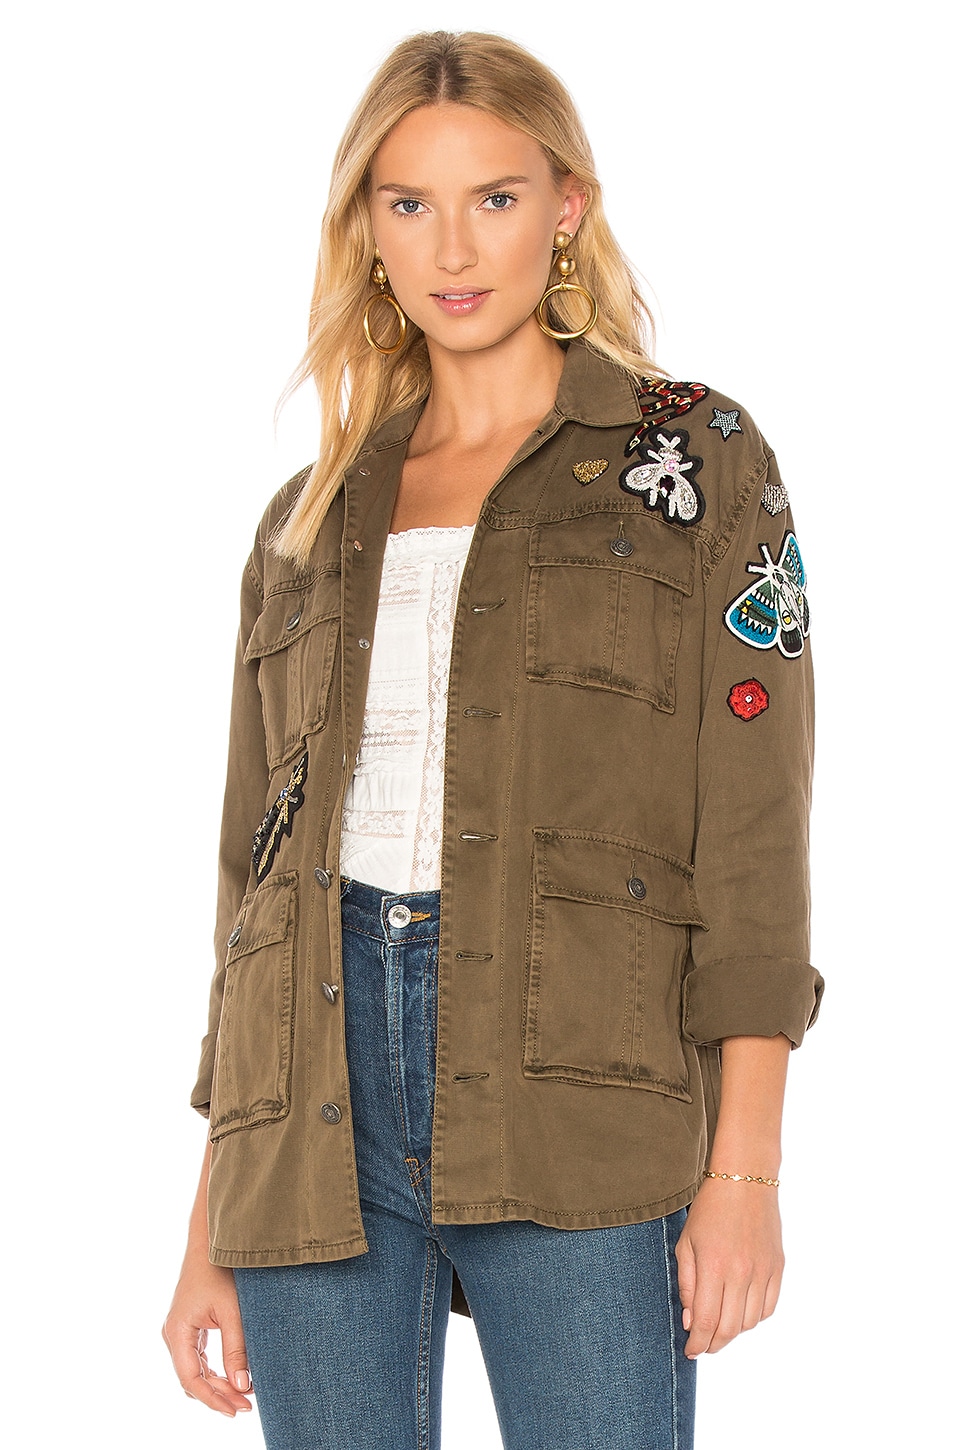 Cinq a Sept Solid Rose Canyon Jacket in Olive | REVOLVE